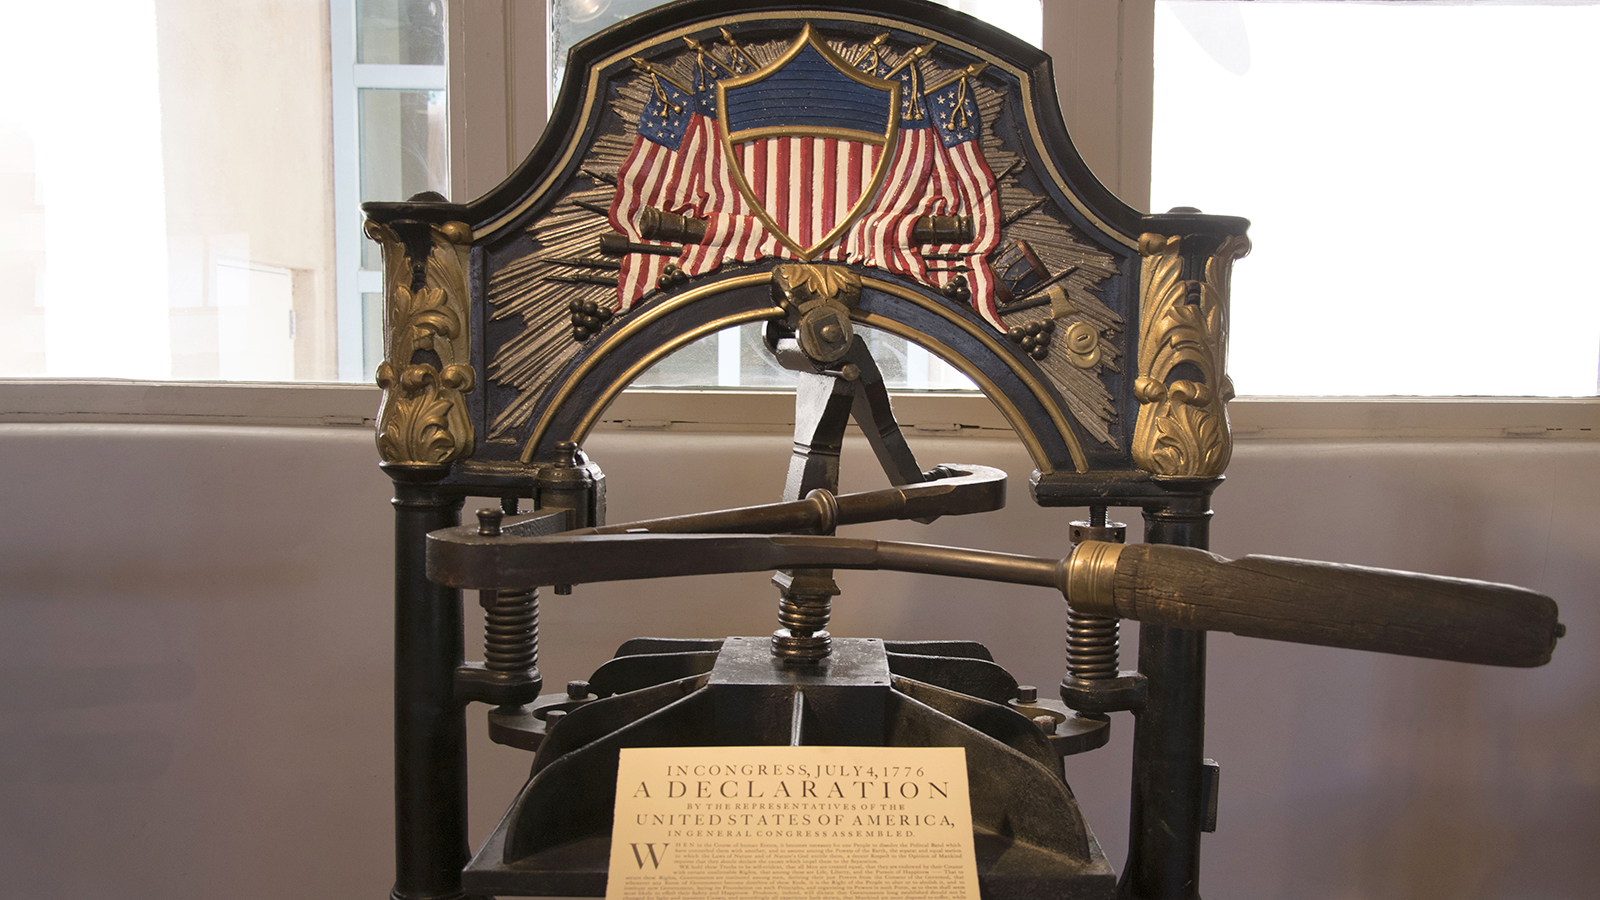 Washington hand press with a commemorative reprinting of the Declaration of Independence. Photo by Hannah Abelbeck